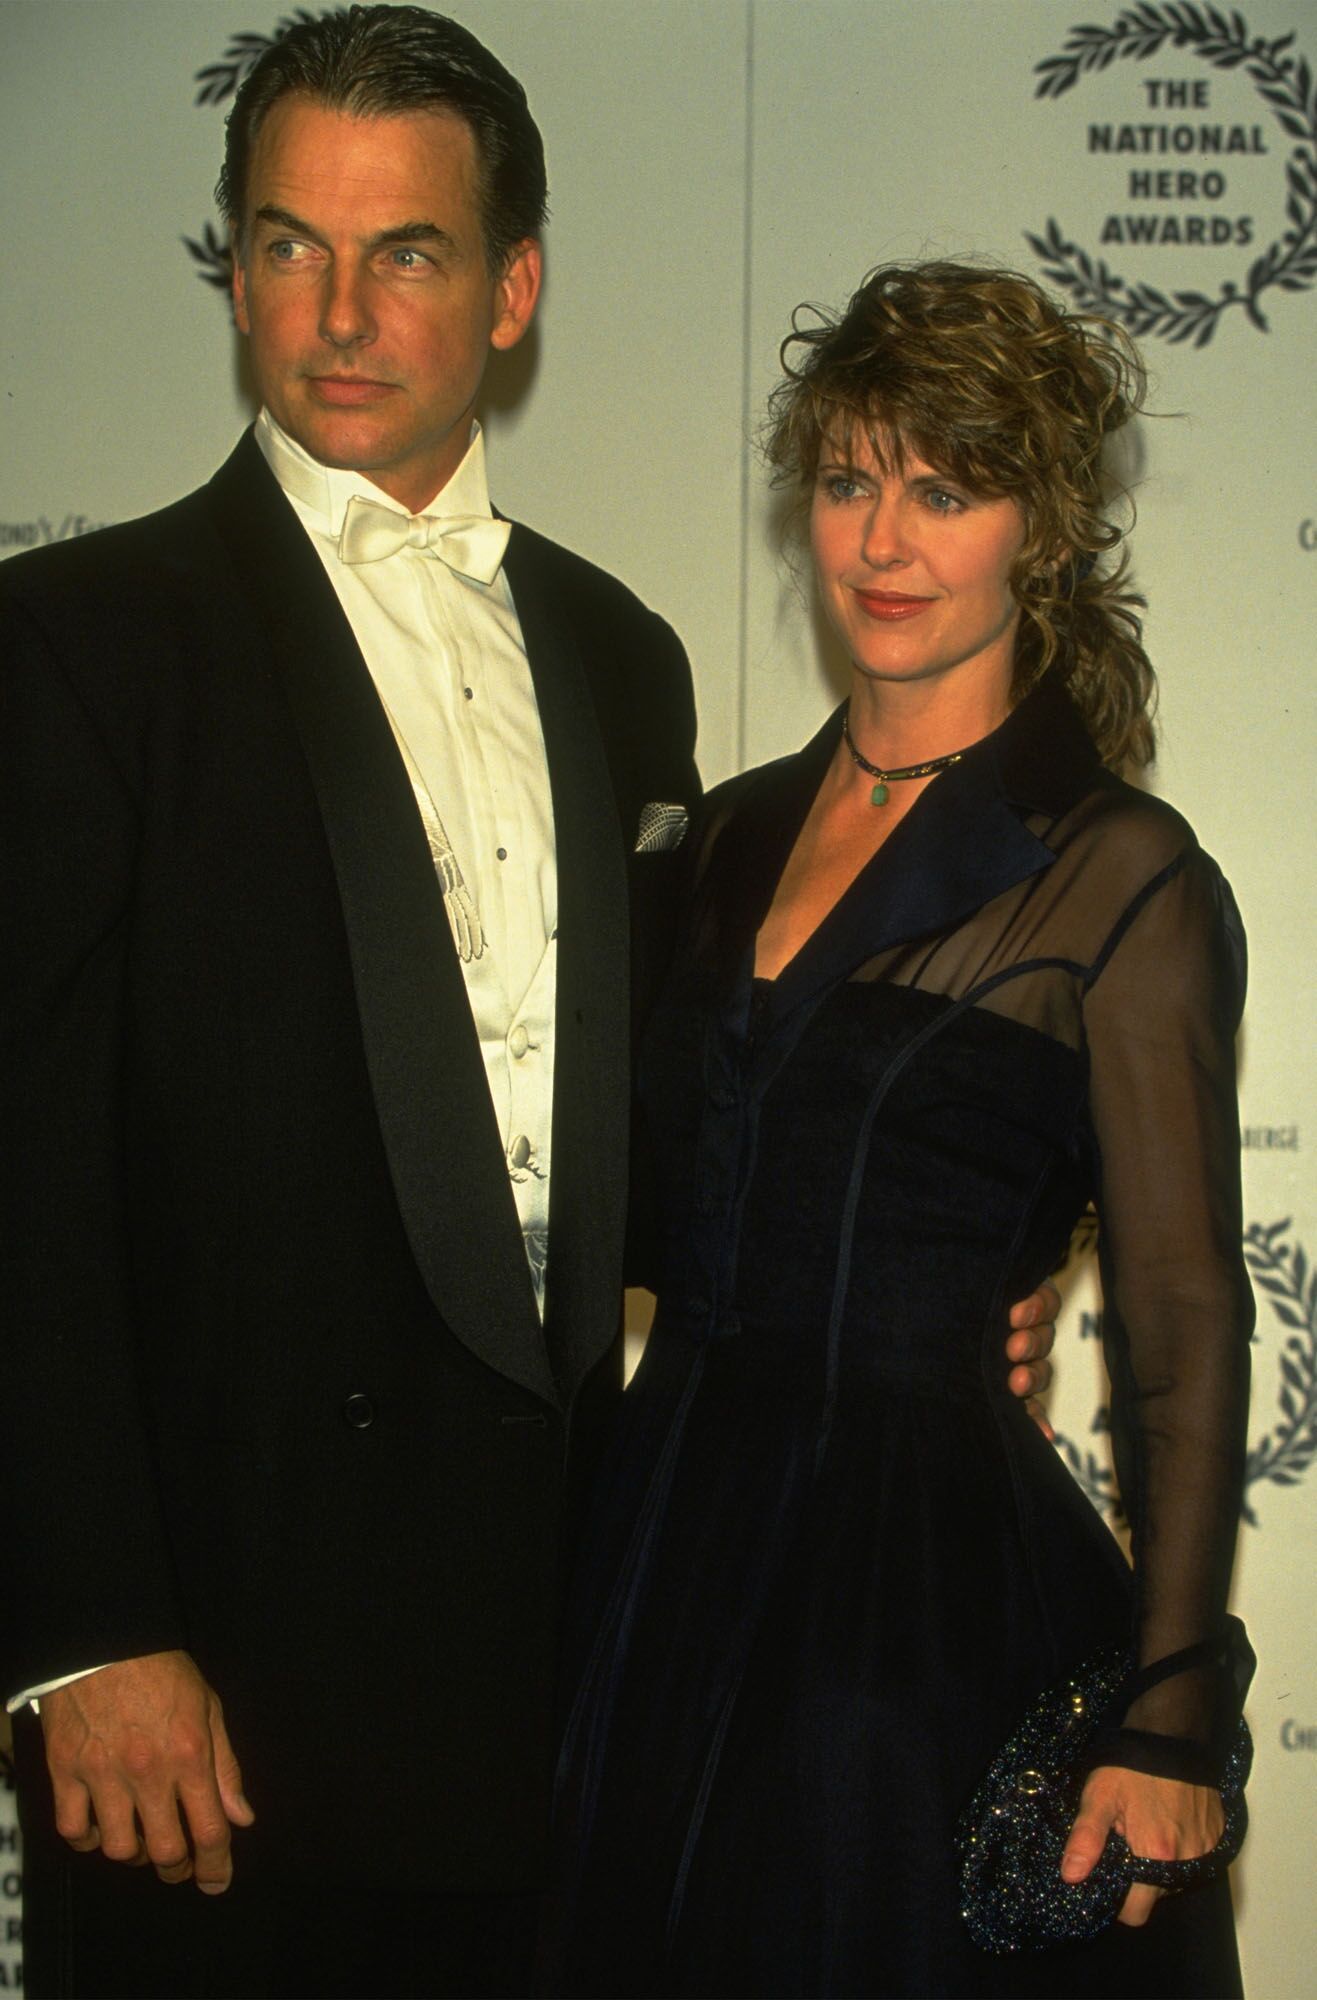 Mark Harmon et Pam Dawber aux National Hero Awards |  Source : Getty Images